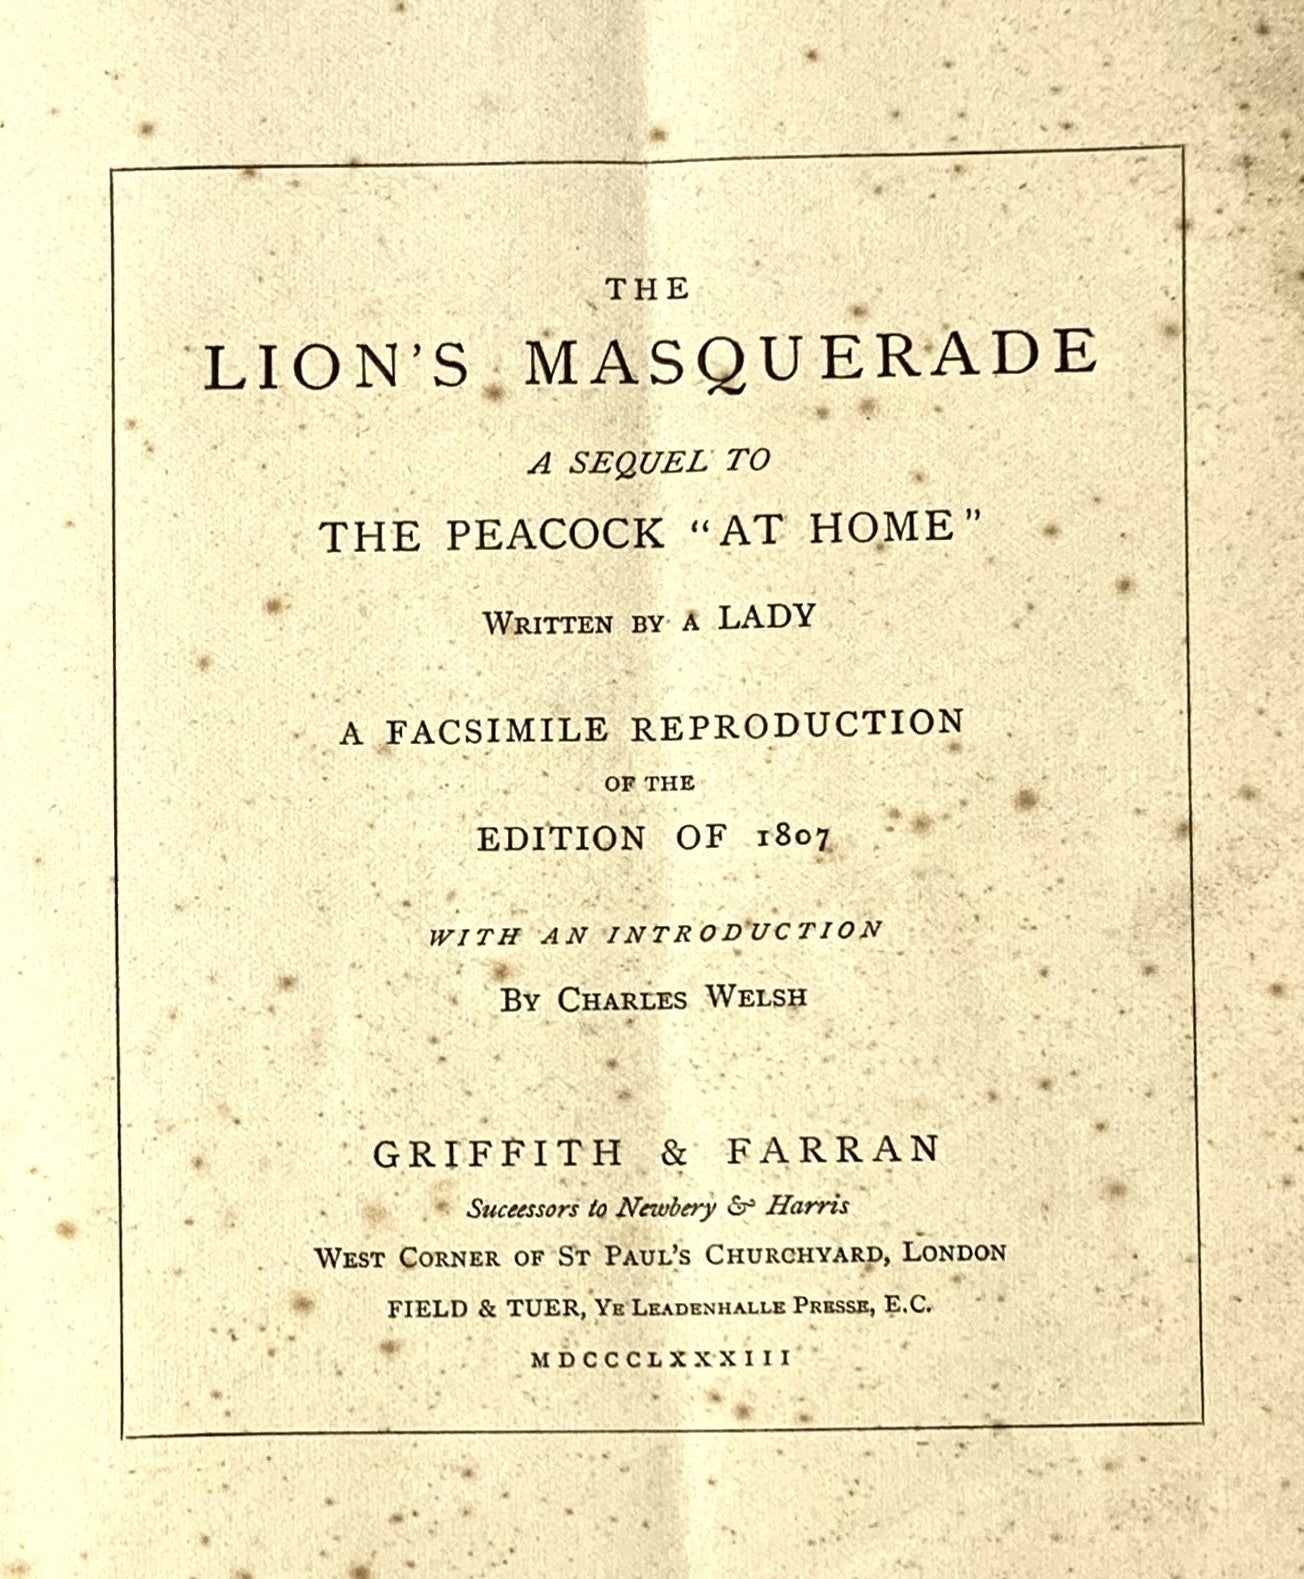 The Lion's Masquerade . A Sequel to the Peacock at Home.